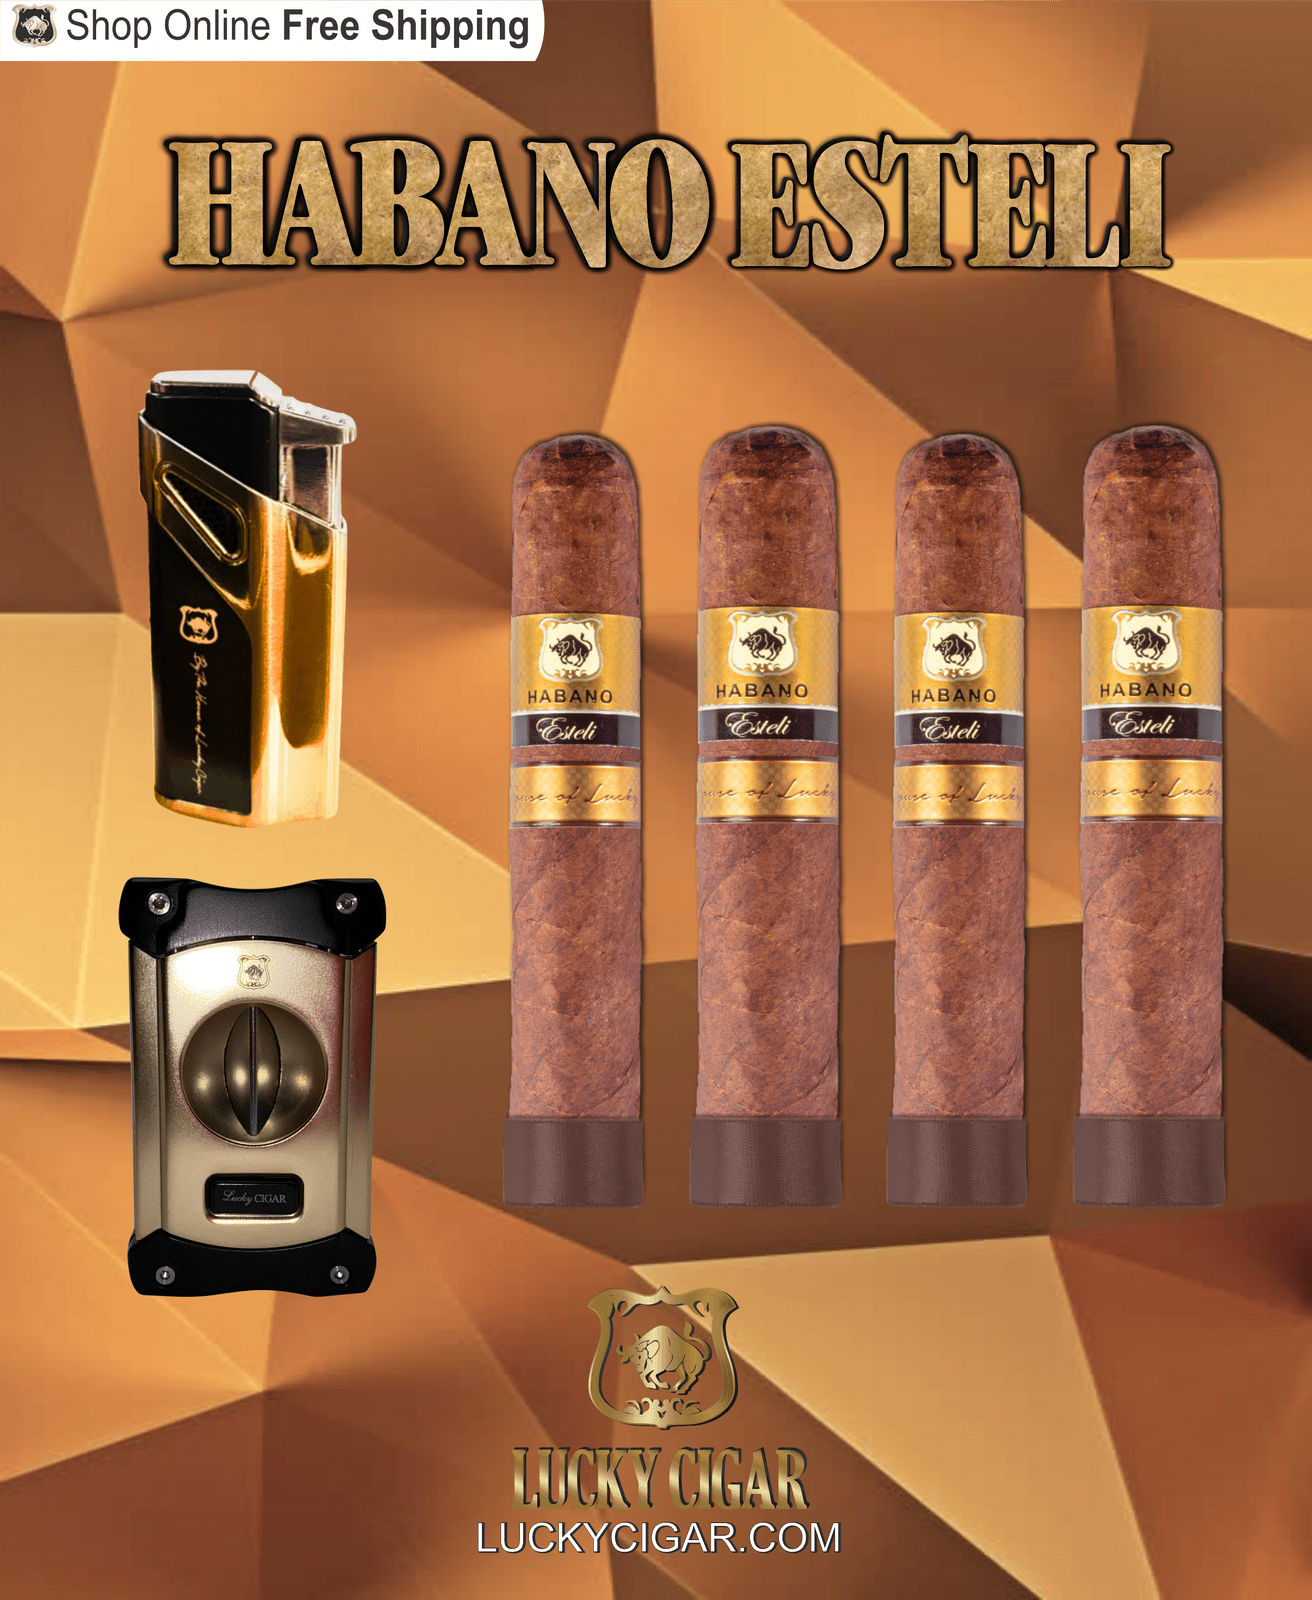 Habano Cigars: Habano Esteli by Lucky Cigar: Set of 4 Cigars, 4 Super Gordo with Cutter, Lighter